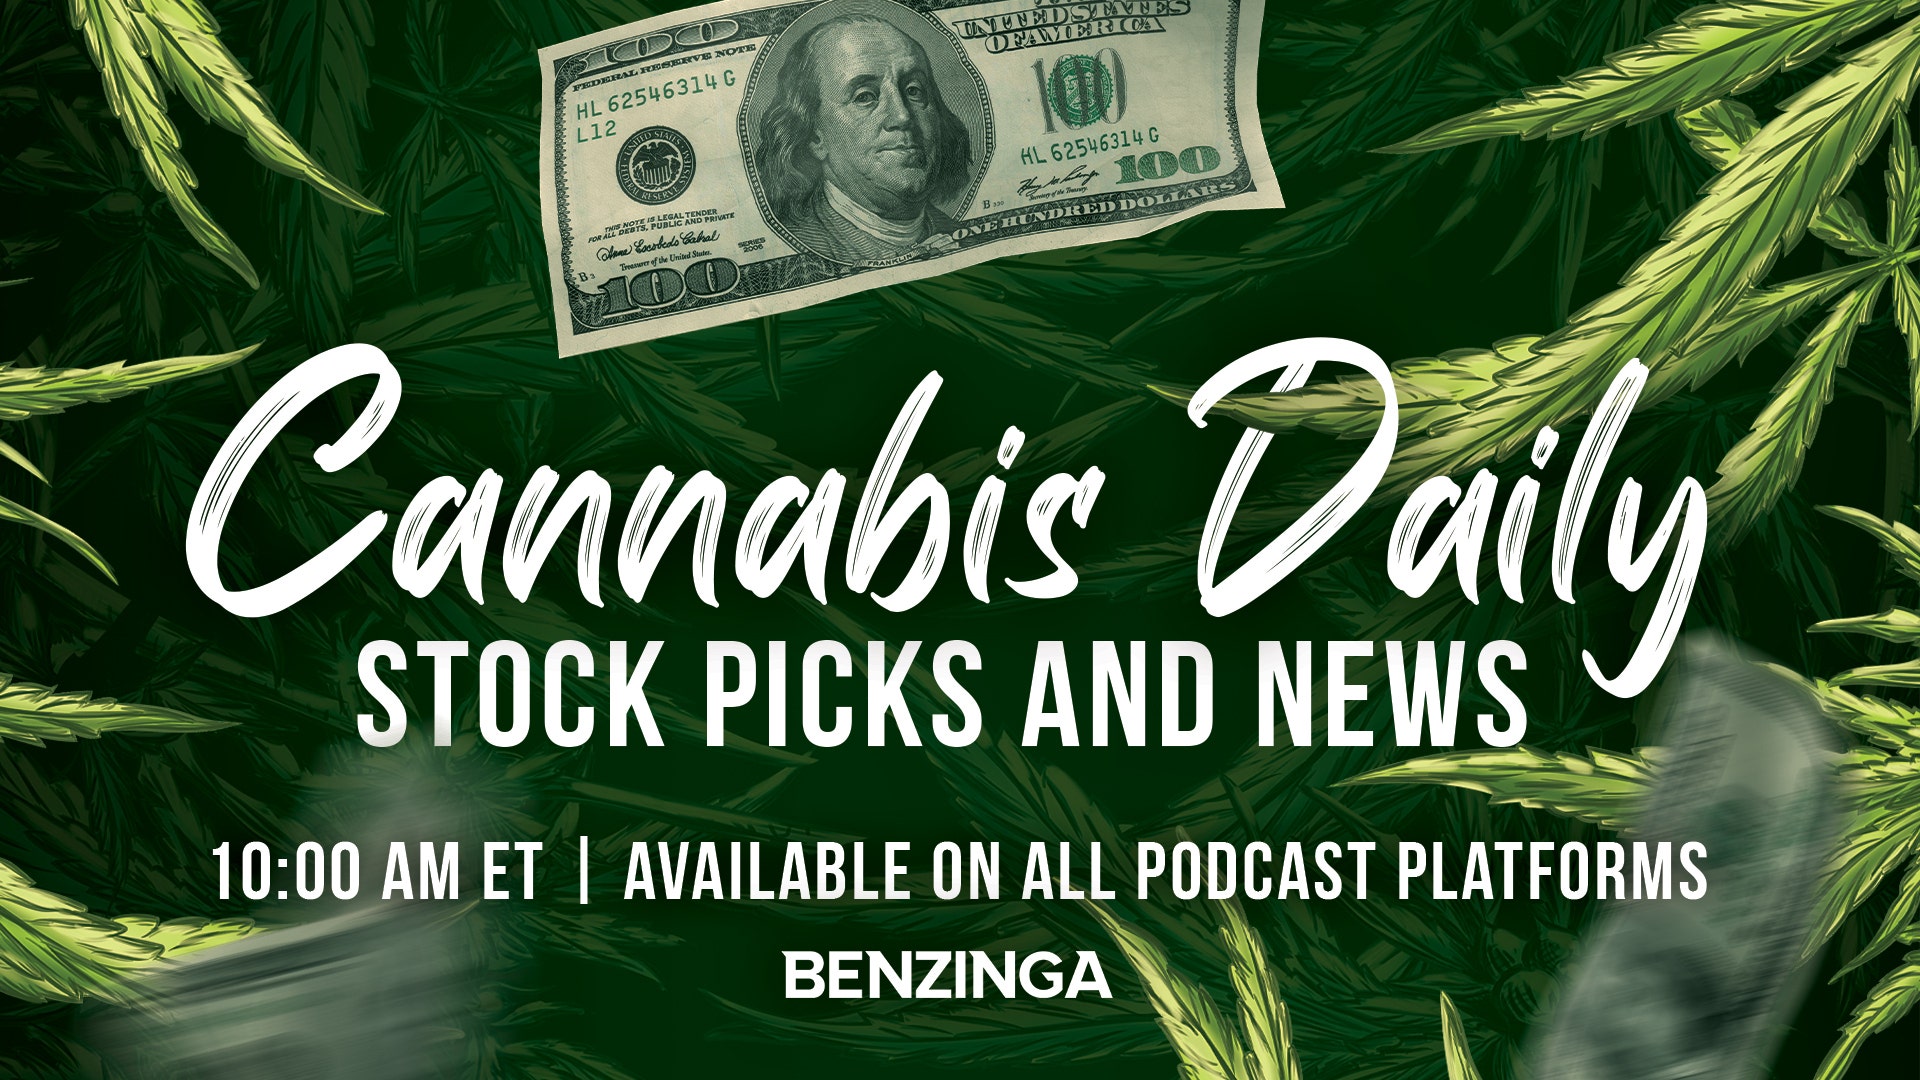 Lofty Revenue Targets In The Cannabis Space — Cannabis Daily December 1, 2021